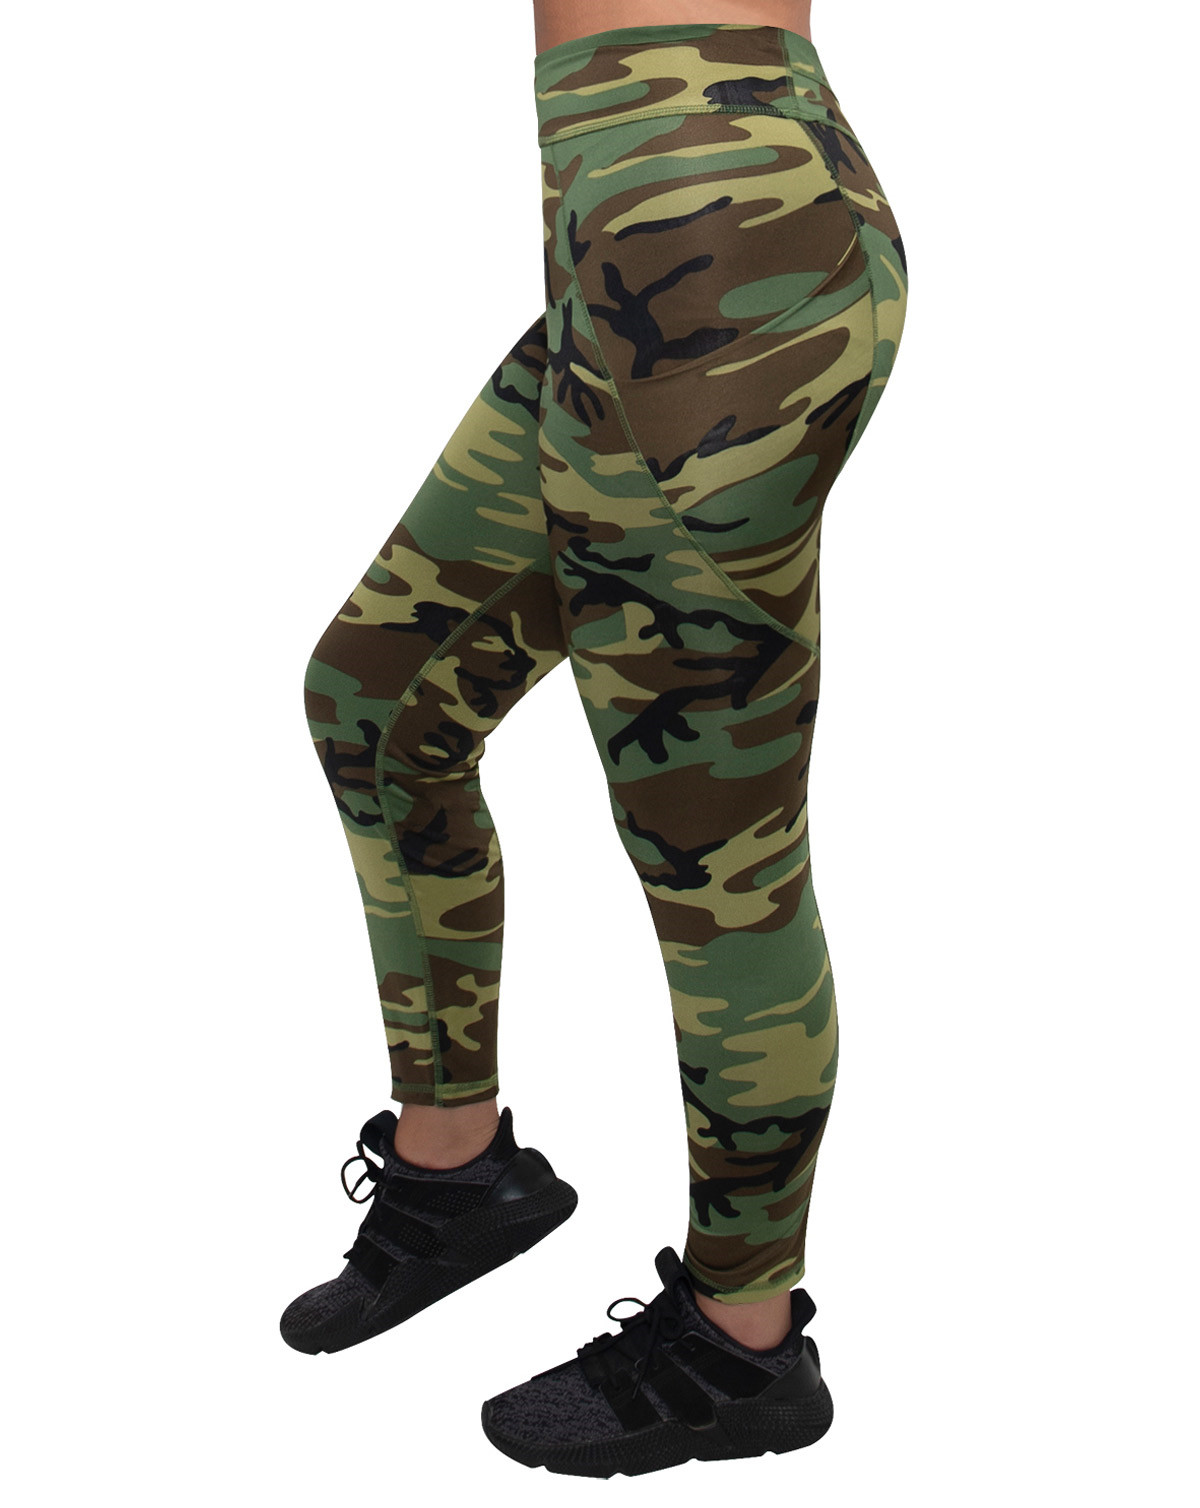 #3 - Rothco Womens Workout Performance Camo Leggings With Pockets (Woodland, 2XL)